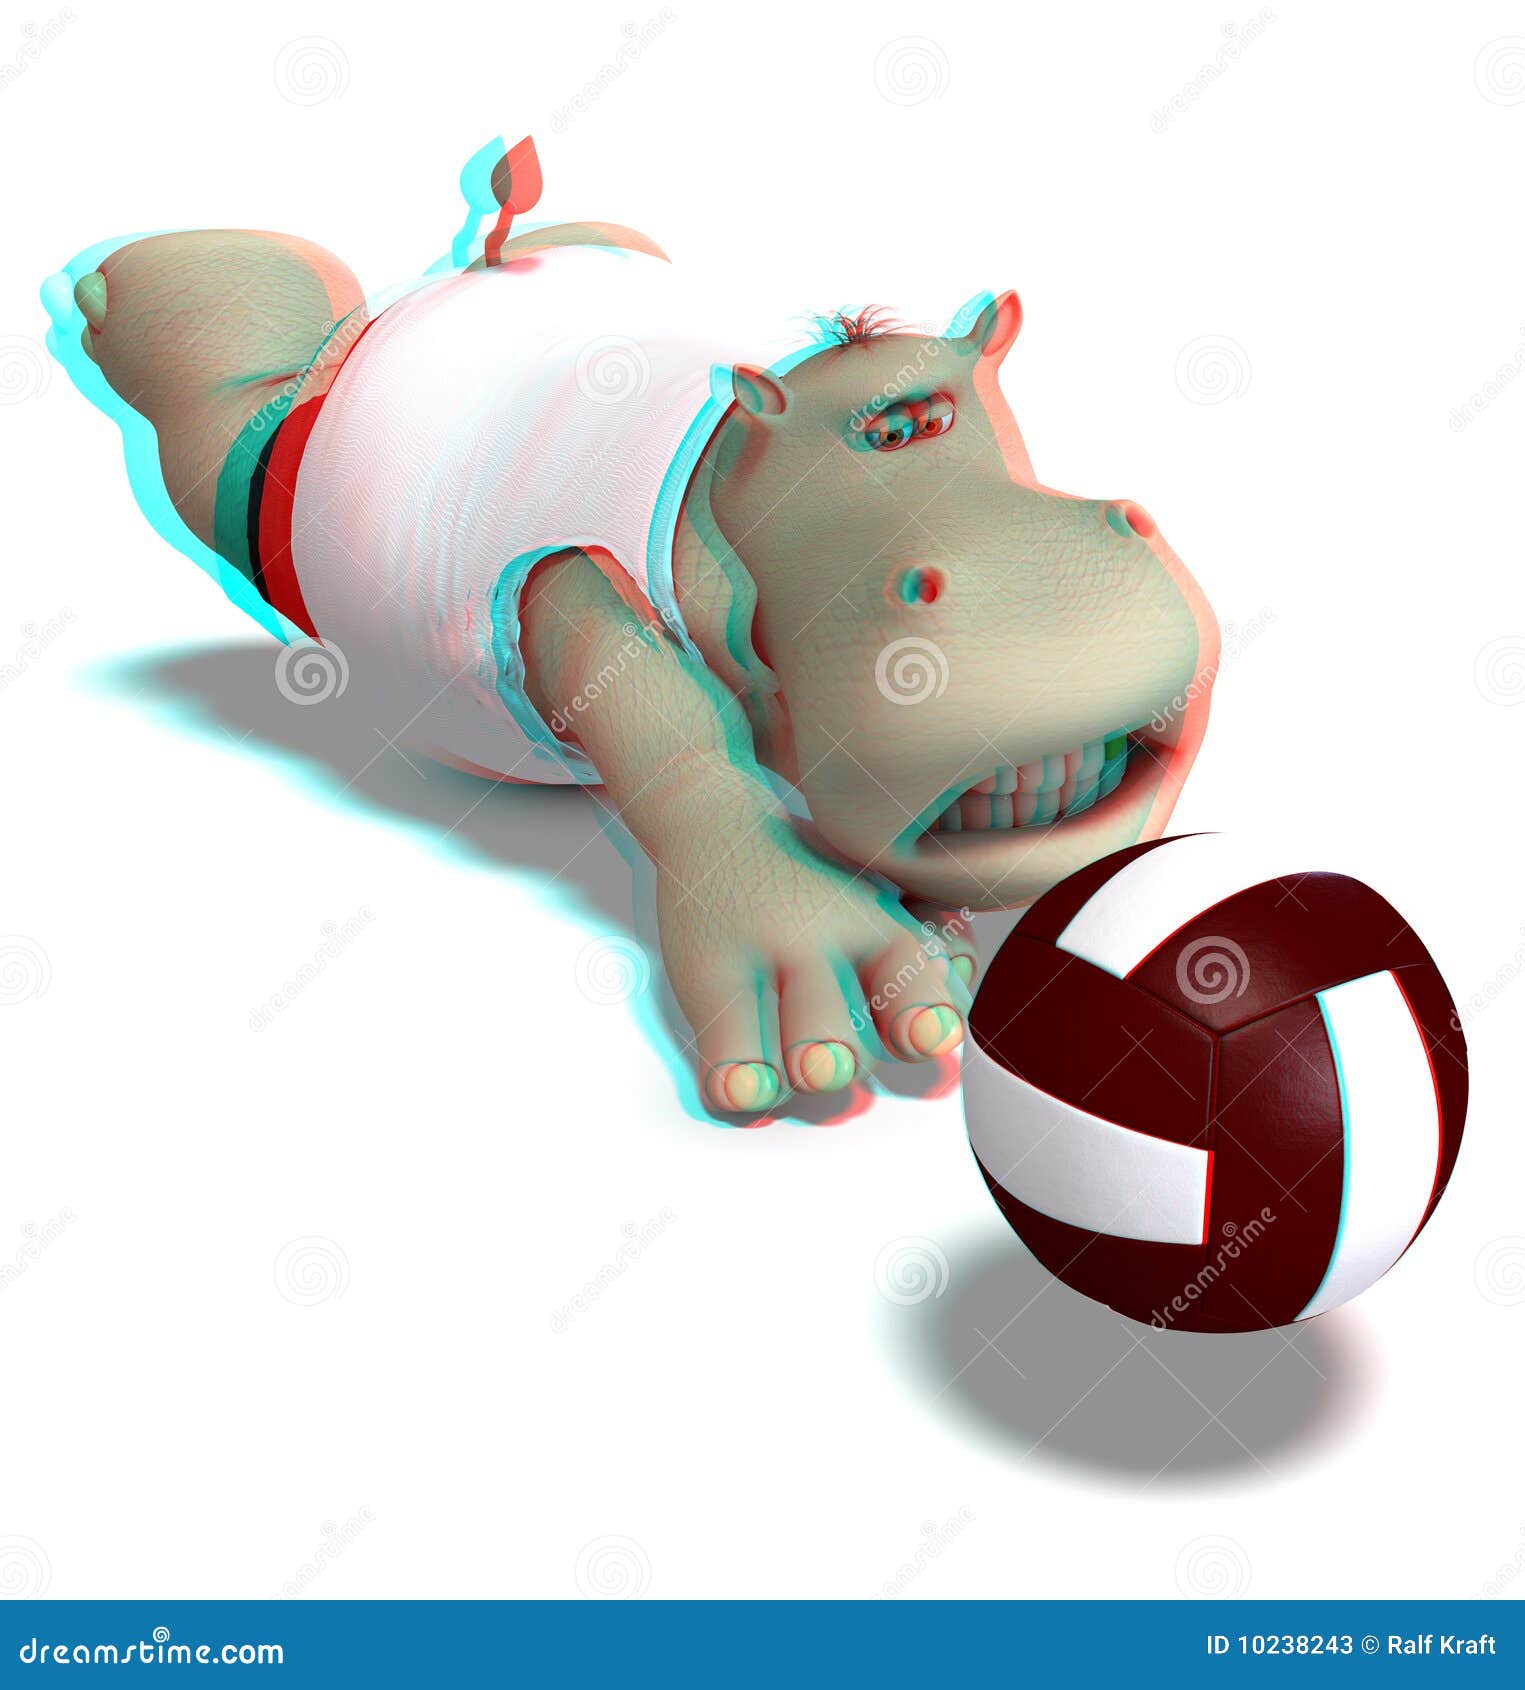 this is an anaglyph image / stereo rendering of a